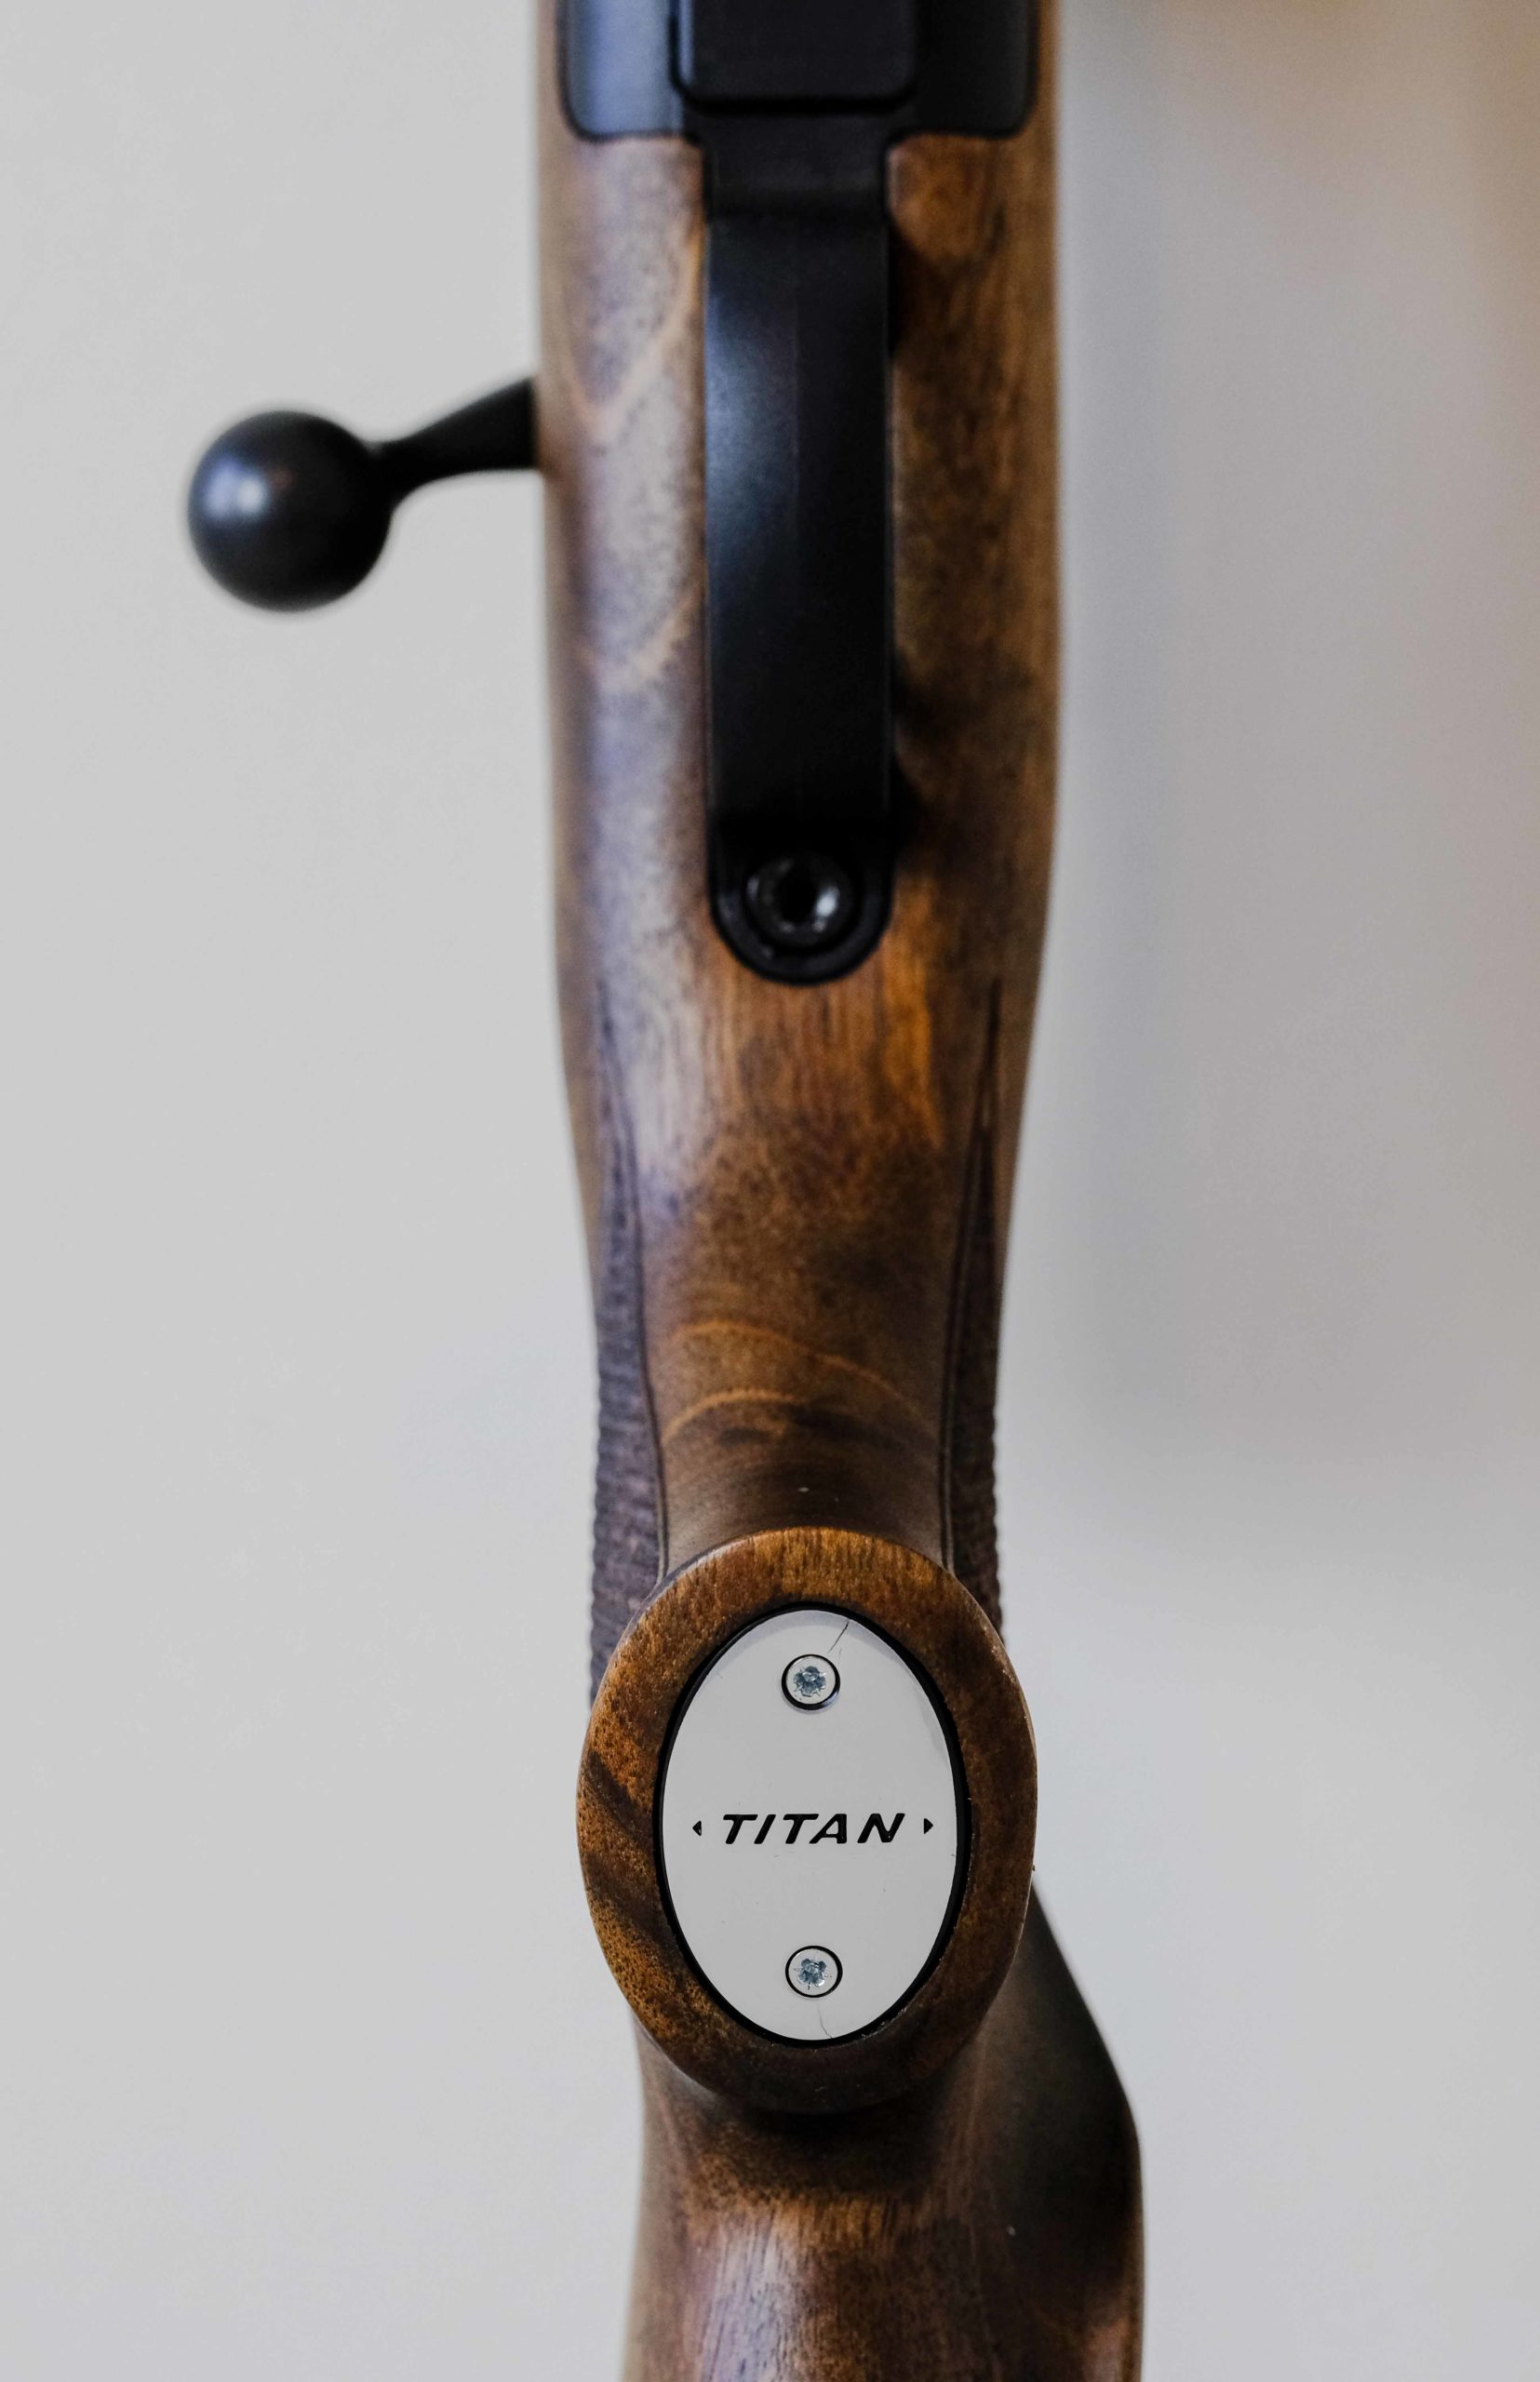 The craftsmanship of the rifle is seen in the metal, the fit and the wood. The pistol-grip plate proudly tells owners they have a Titan rifle in their hands.